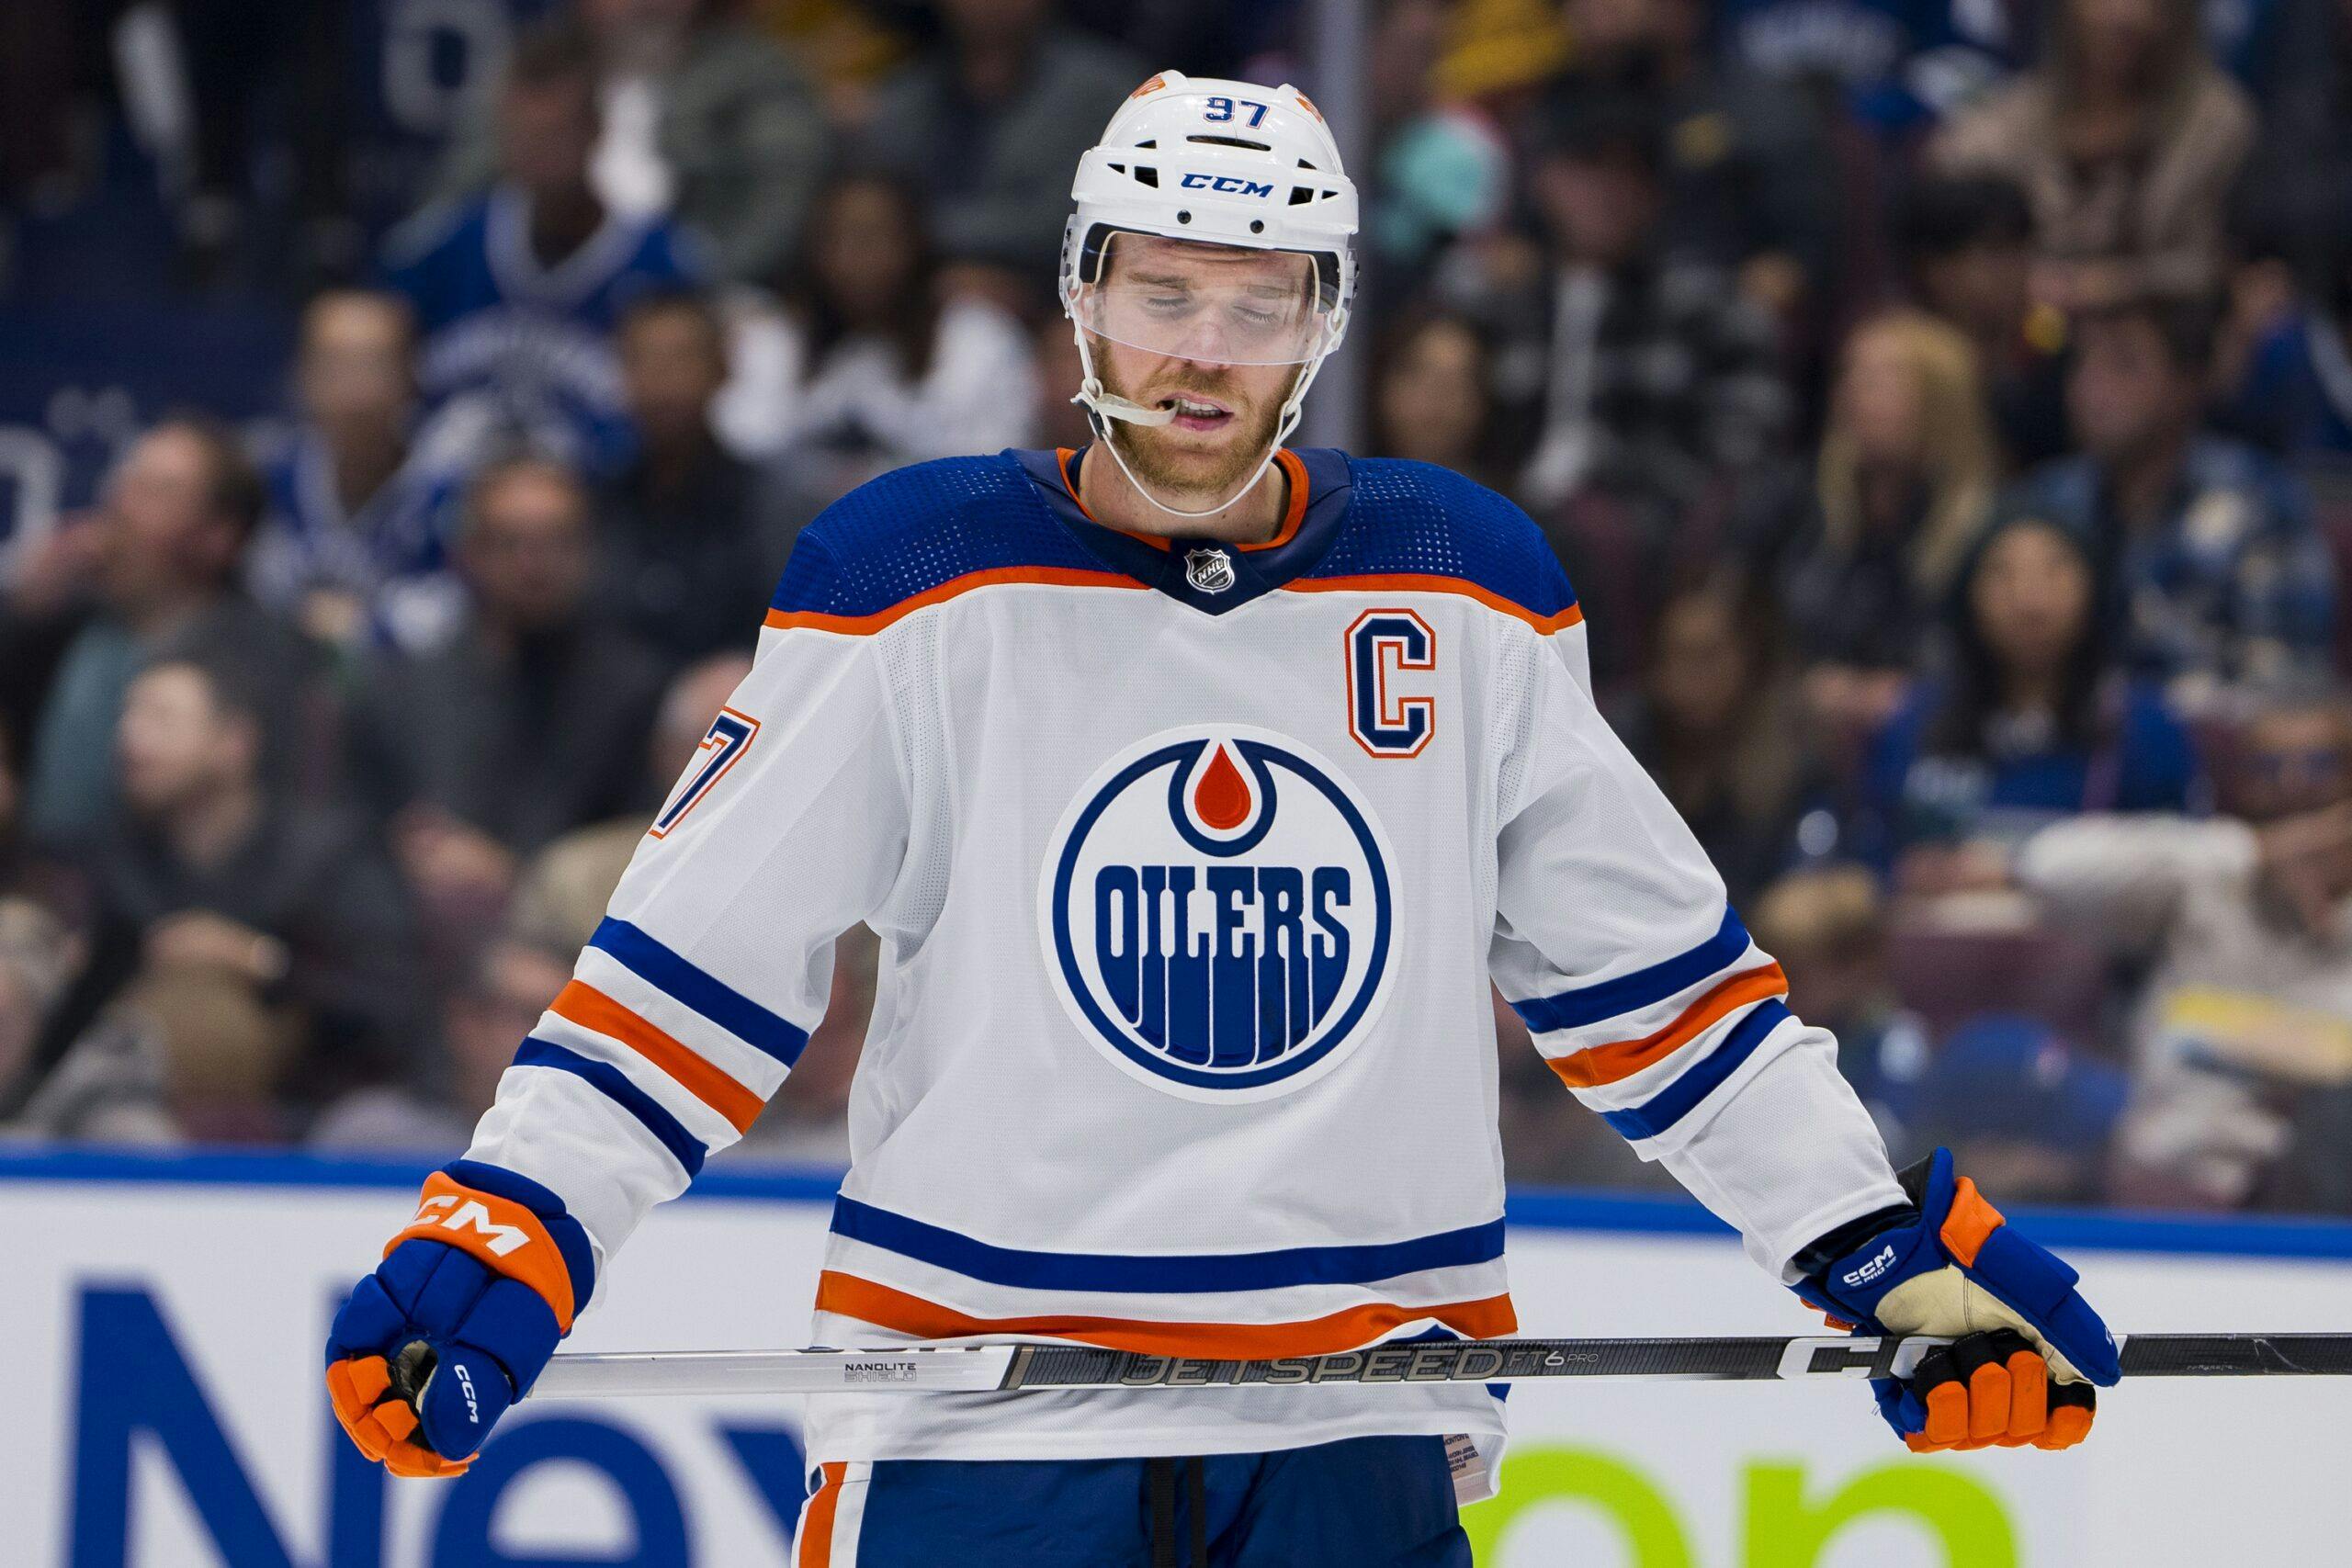 Oilers captain Connor McDavid to miss 1–2 weeks with upper-body injury